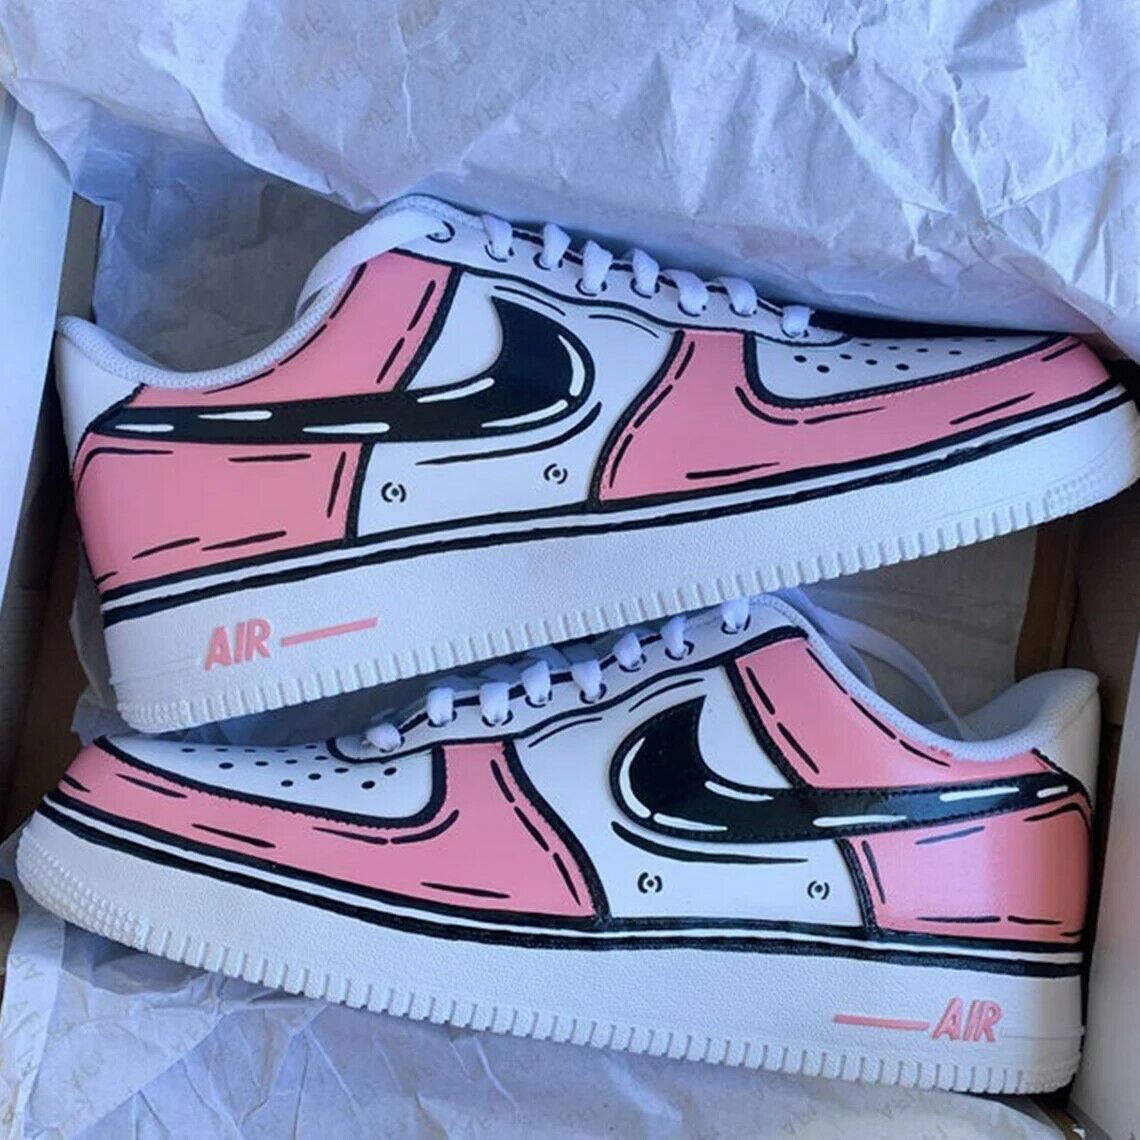 Air Force 1 Custom Low Cartoon Pink Shoes White Black Outline Mens Wom –  Rose Customs, Air Force 1 Custom Shoes Sneakers Design Your Own AF1